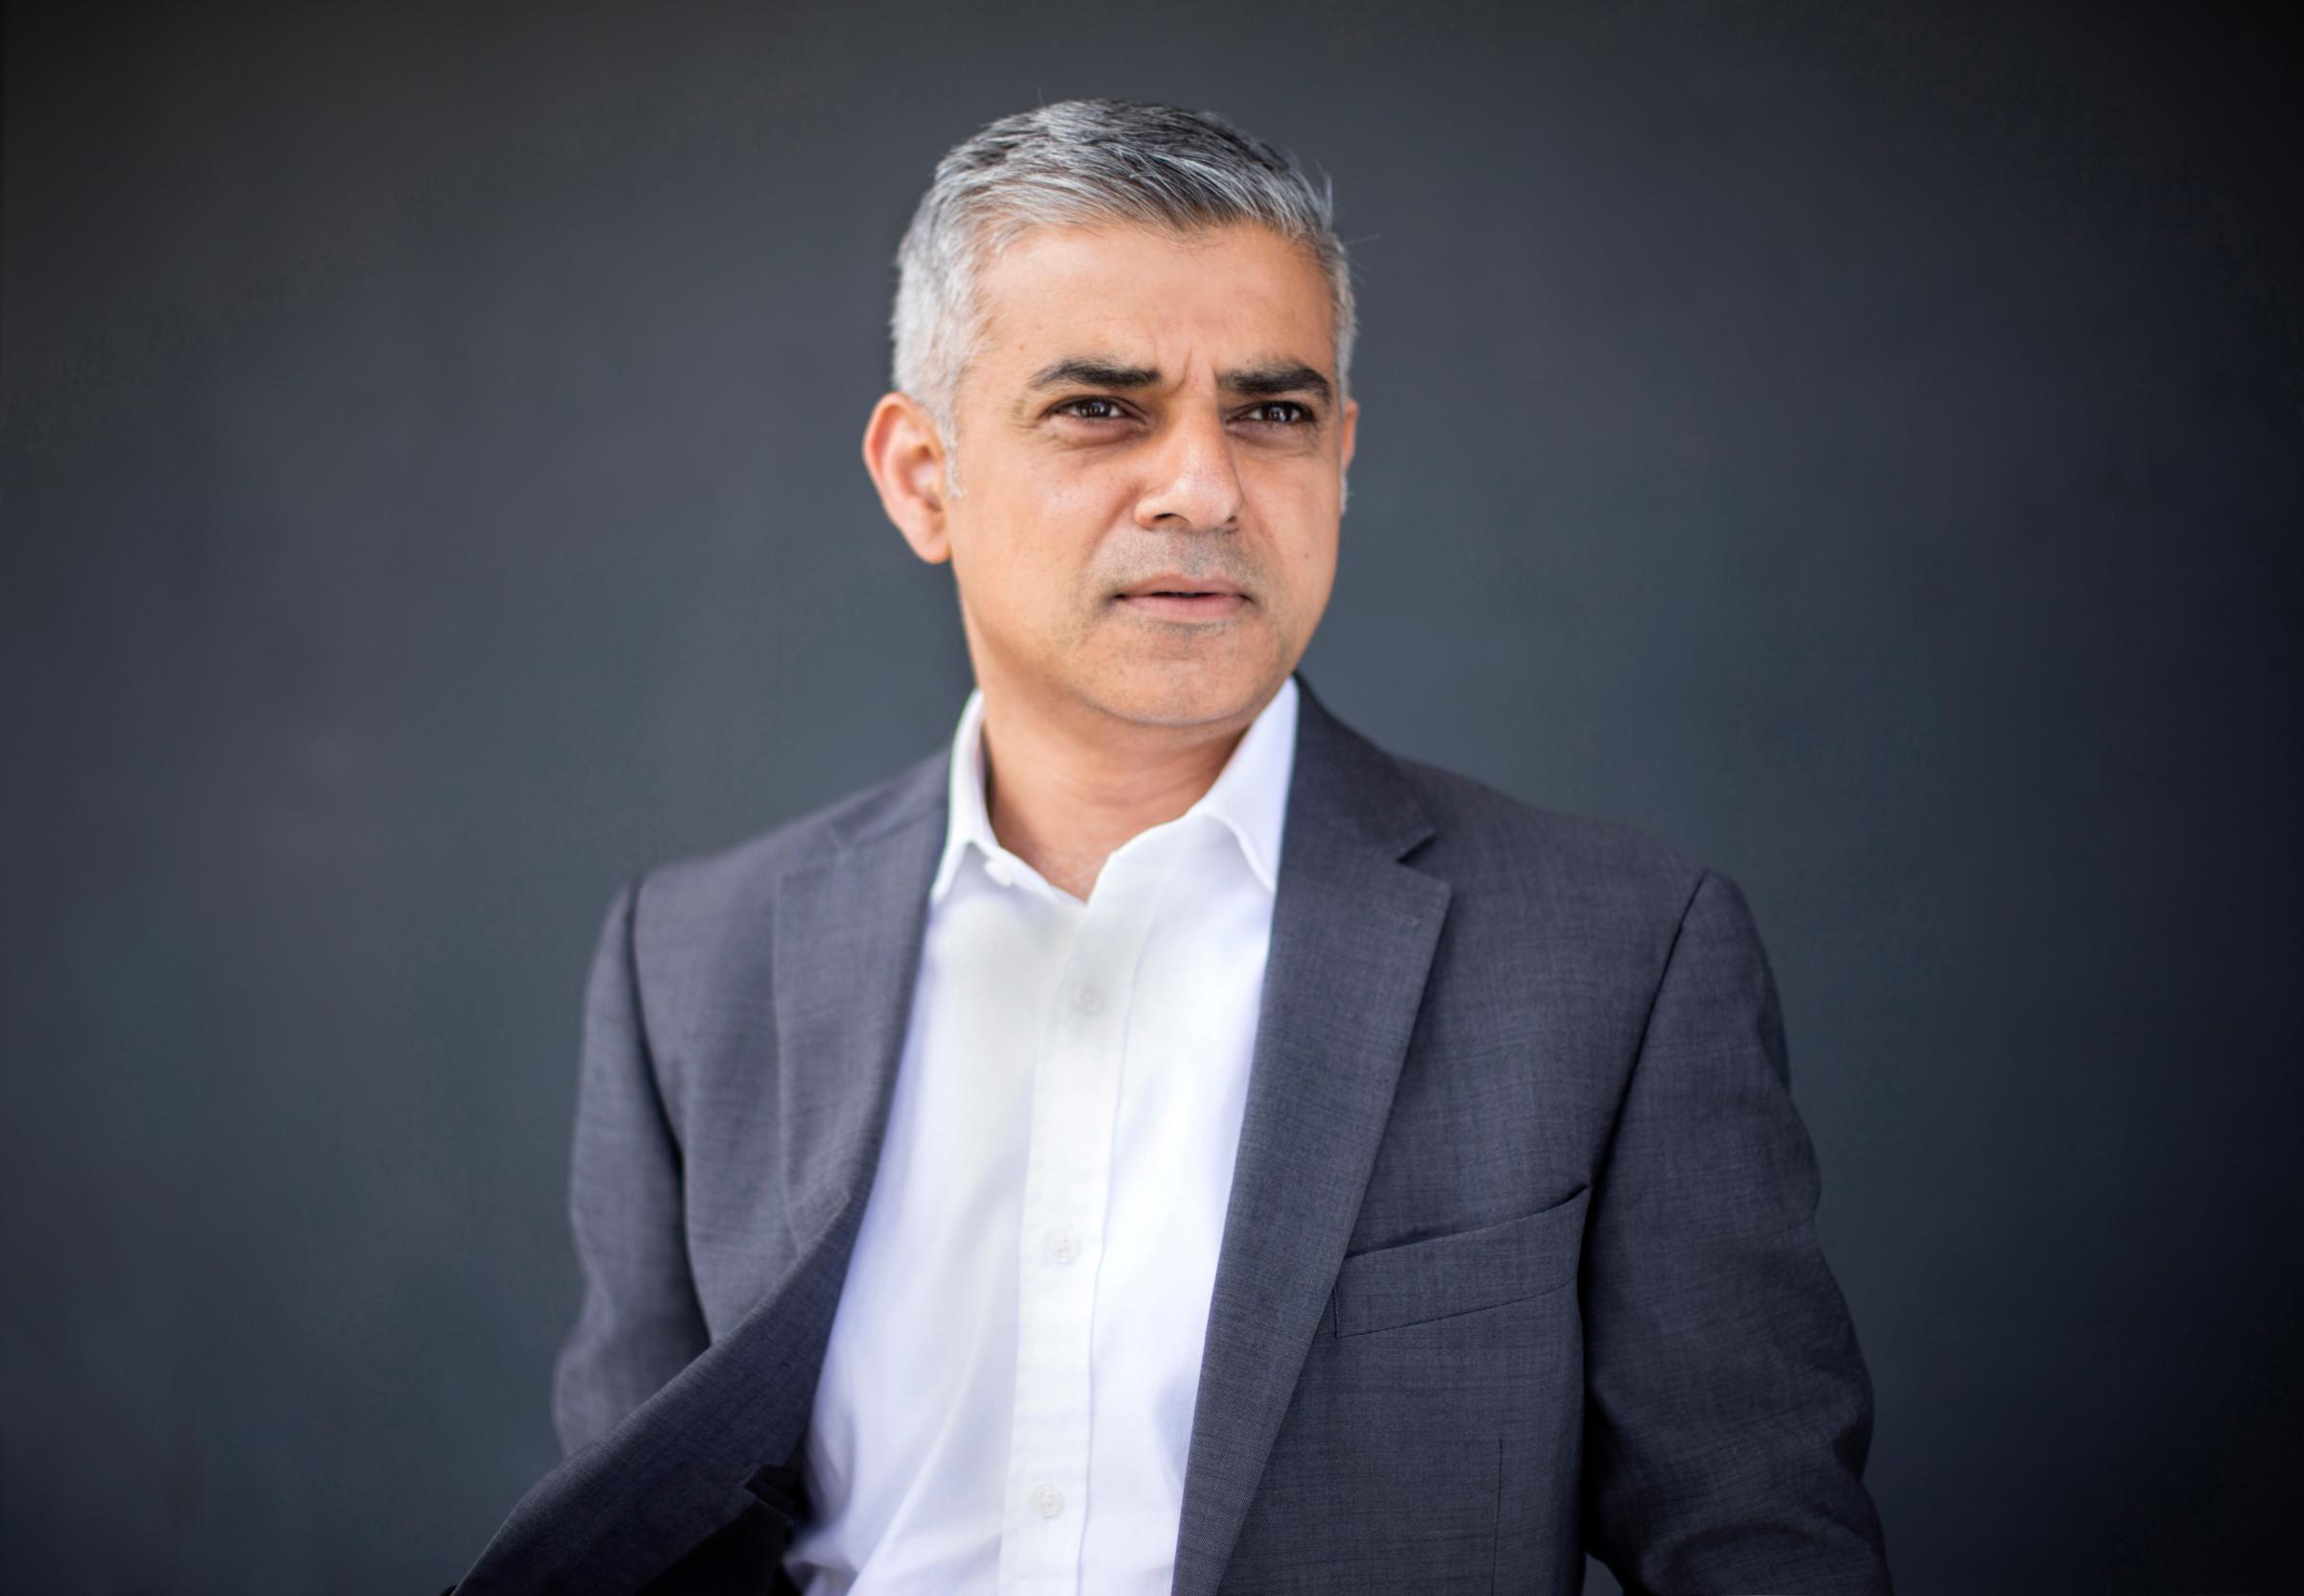 Sadiq Khan, London's newly elected mayor, poses for a portrait in London, May 8, 2016.